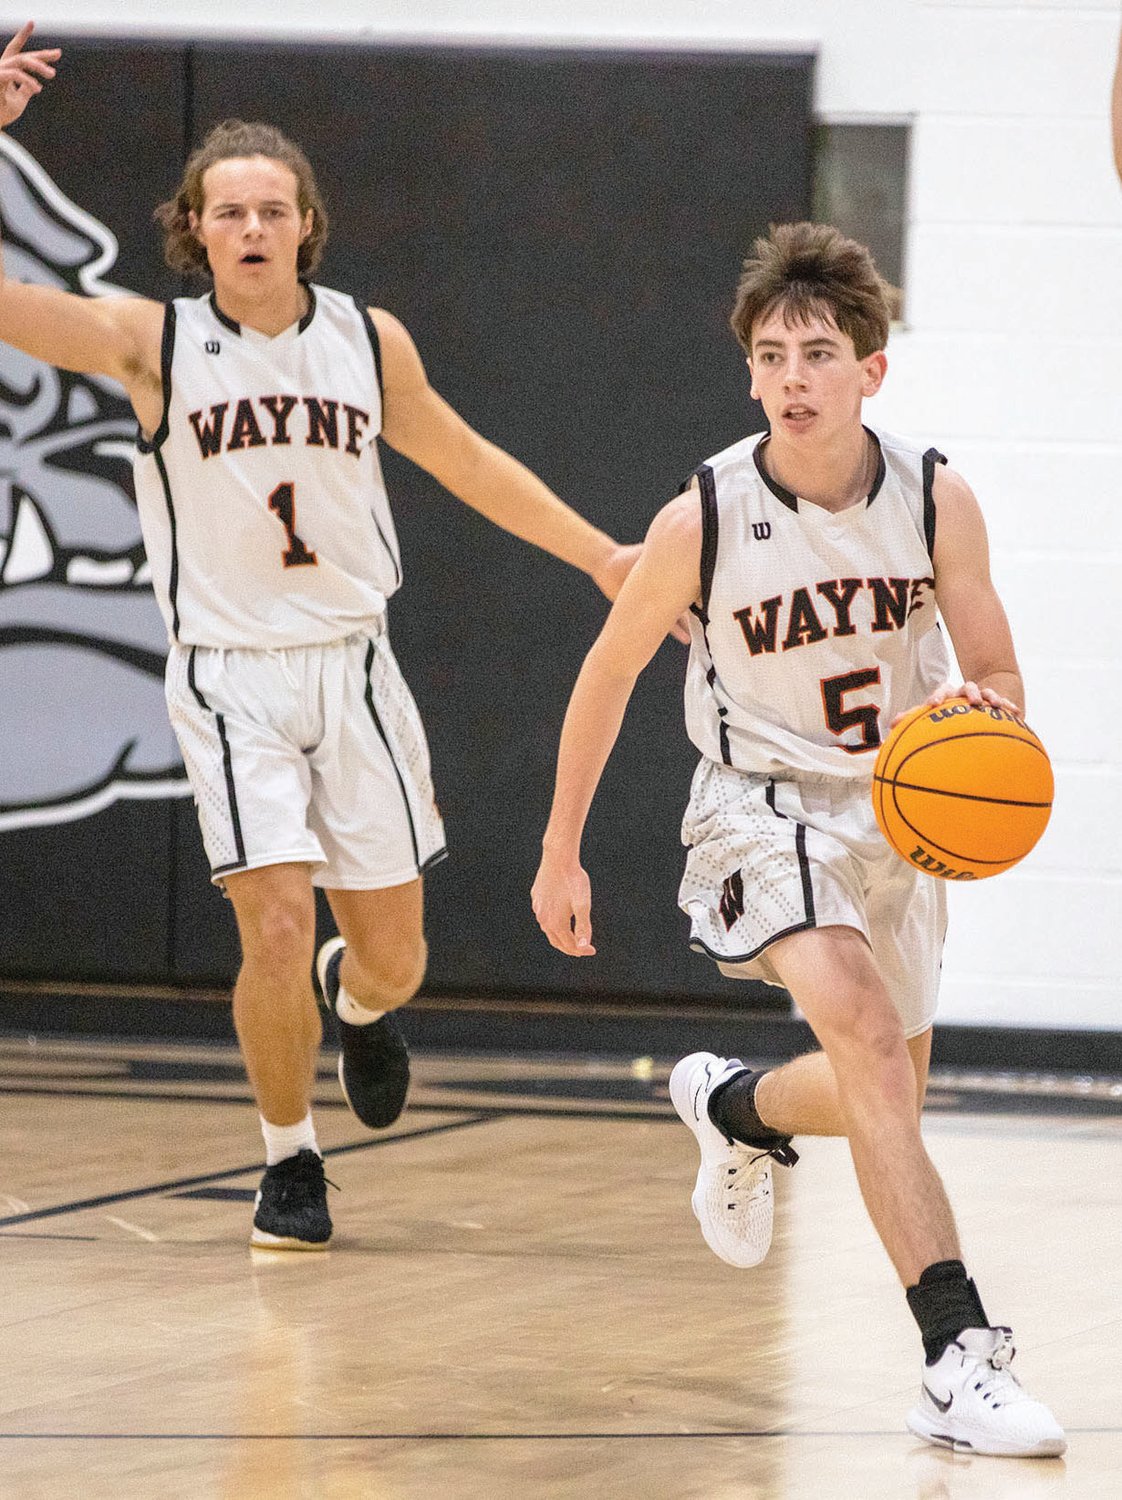 Wayne ballers Kaleb Madden (5) and Ethan Mullins (1) move the ball down court for the Bulldogs. Wayne is scheduled to host Konawa Friday night.